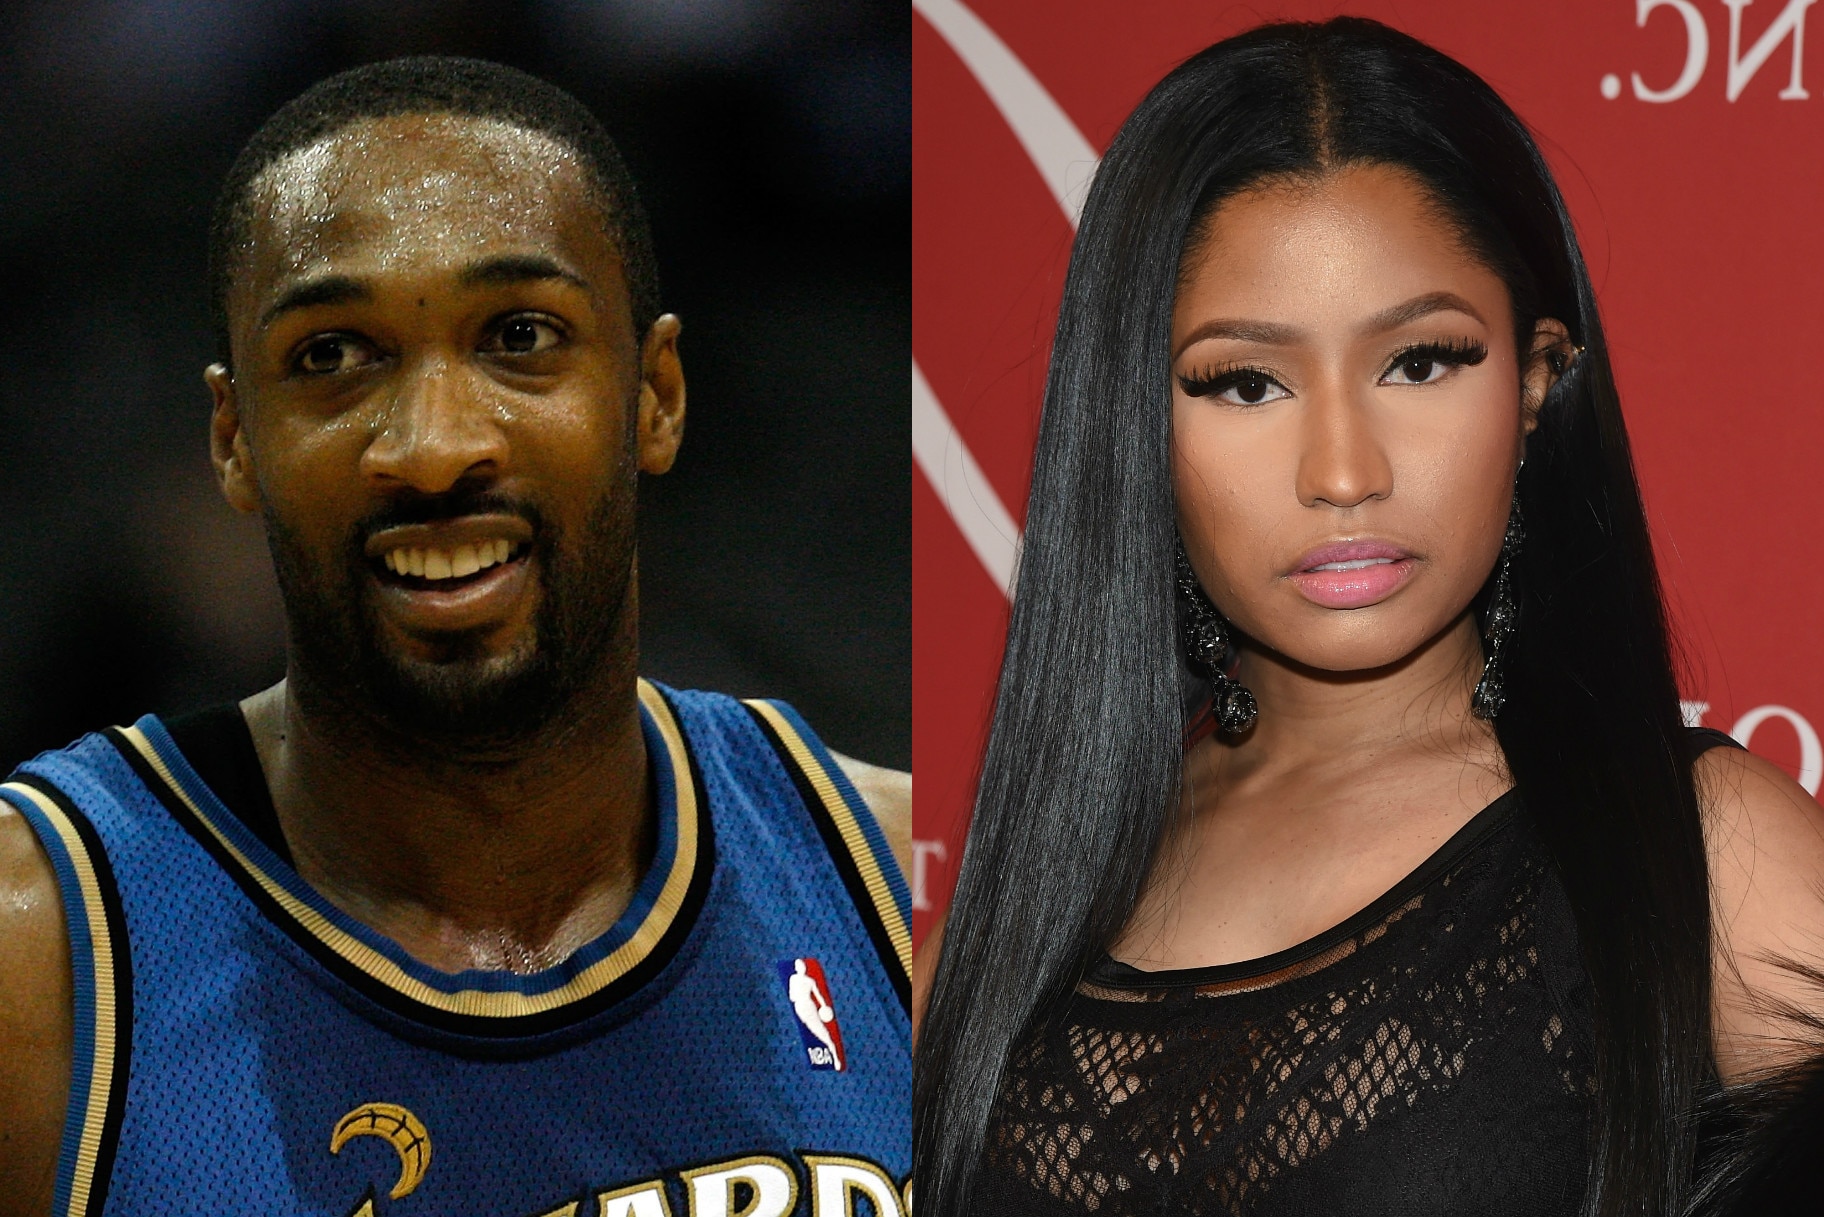 Gilbert Arenas Thinks Nicki Minaj, Not Remy Ma, Is The "Queen Of Rap" - Very Real (blog)